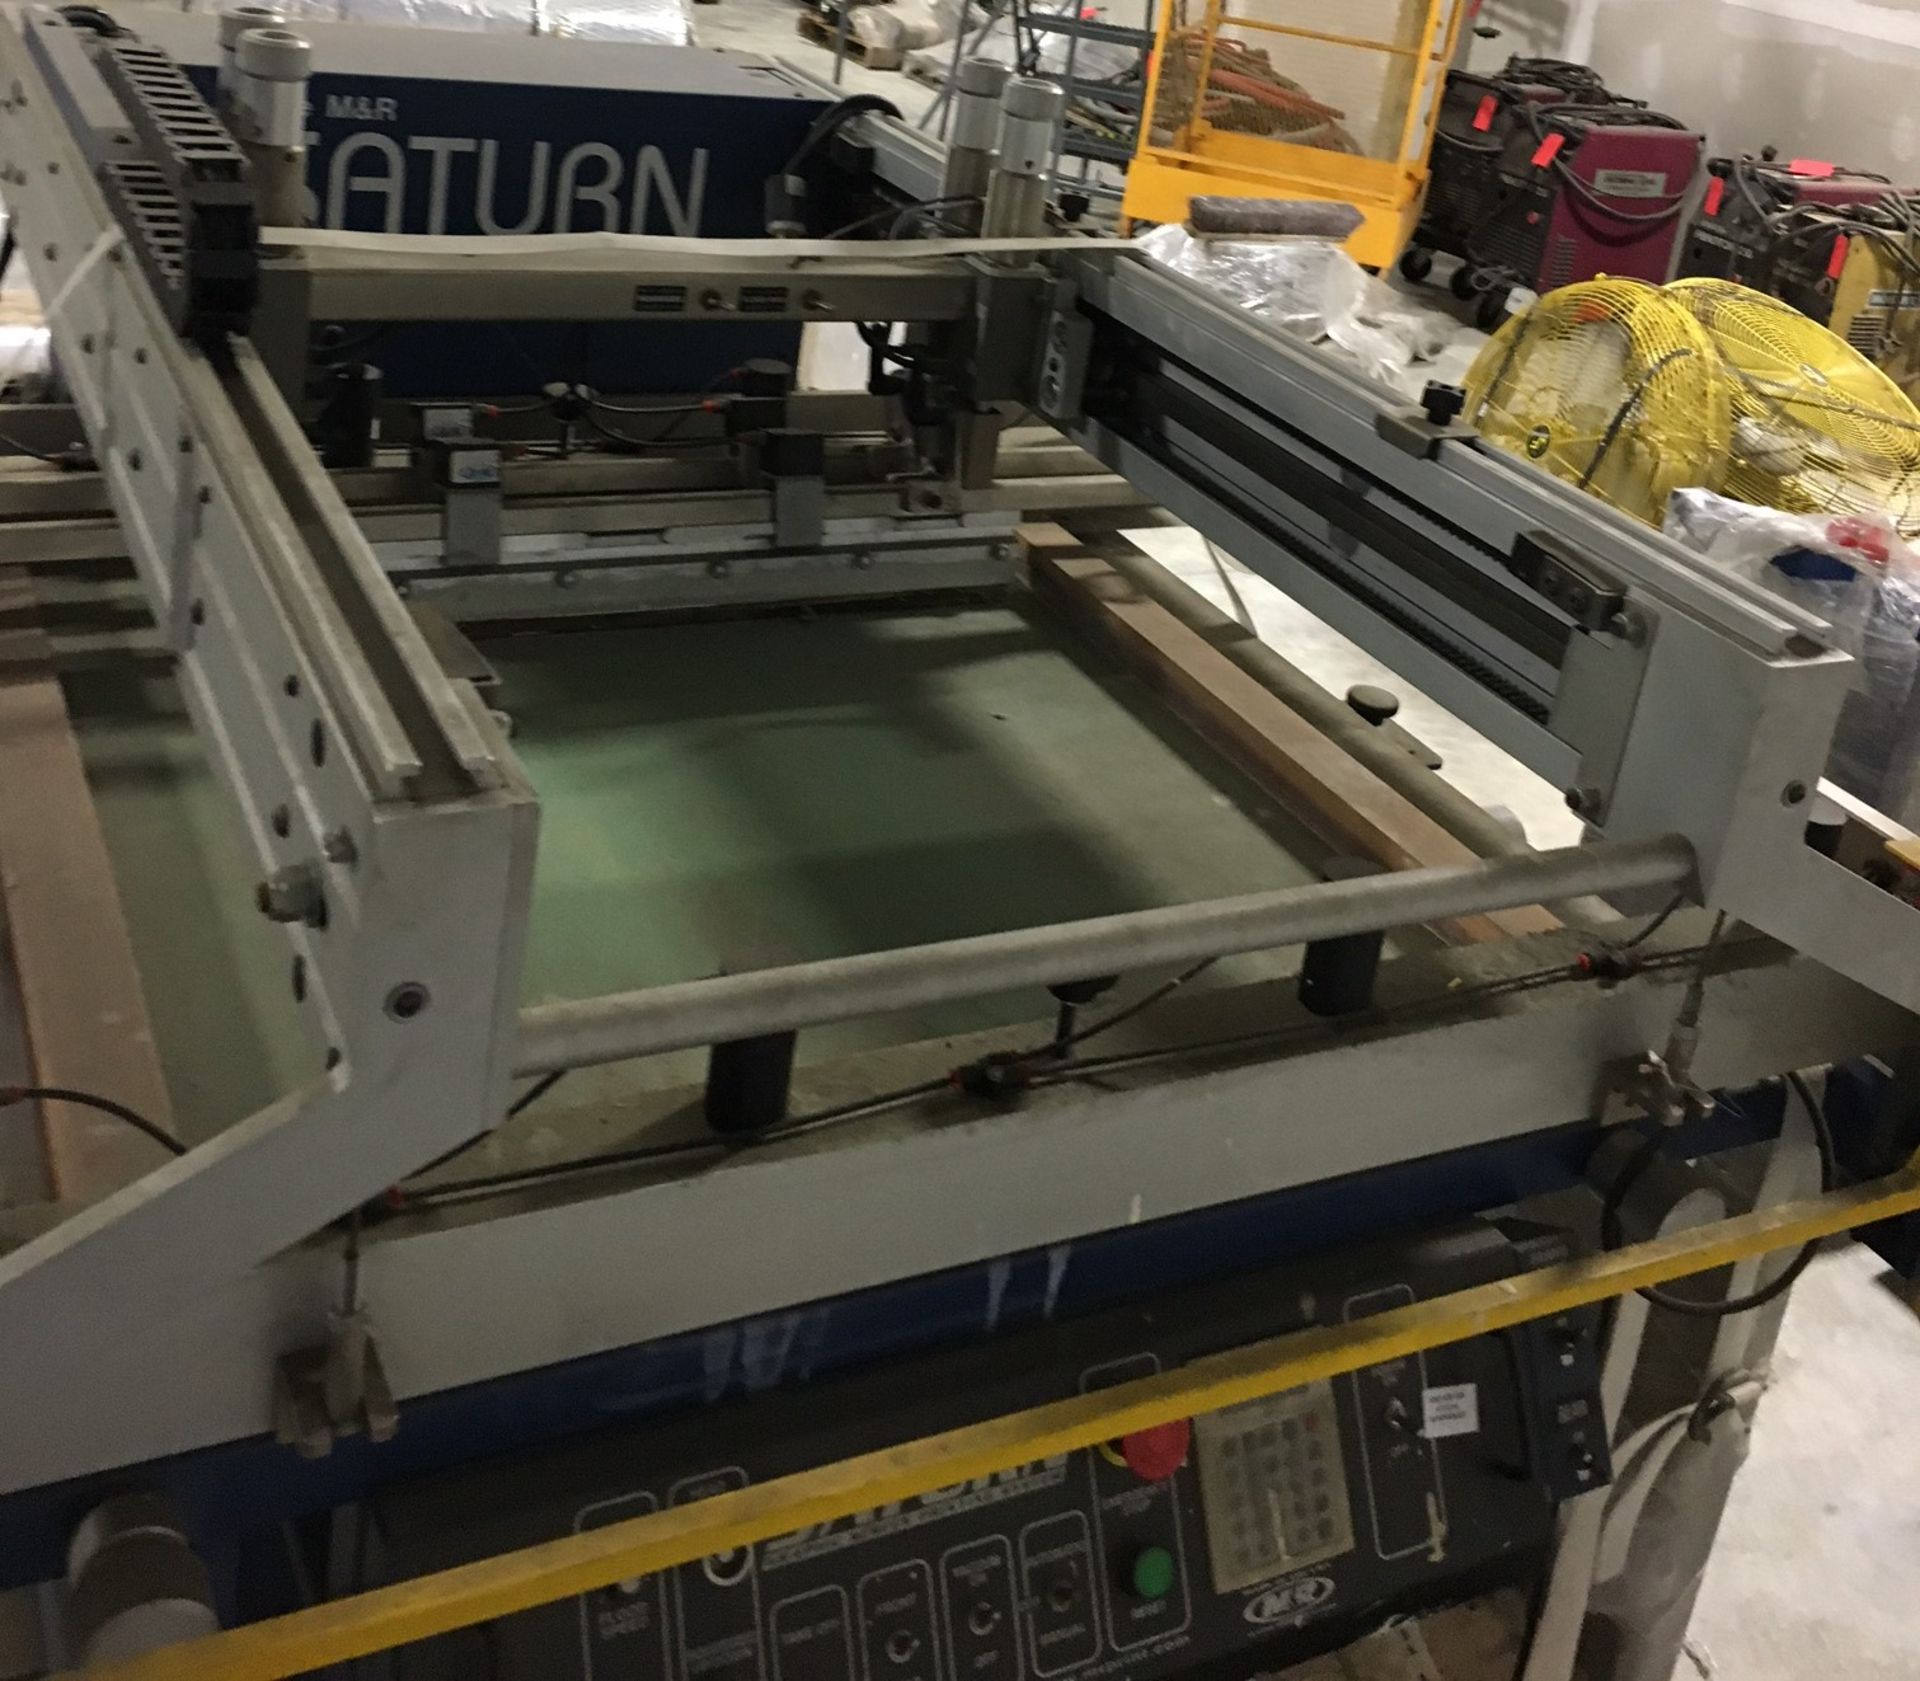 M&R Saturn Model: SATFB-2538 Automated Graphic Screen Printing System (Made in the USA) - Image 2 of 4